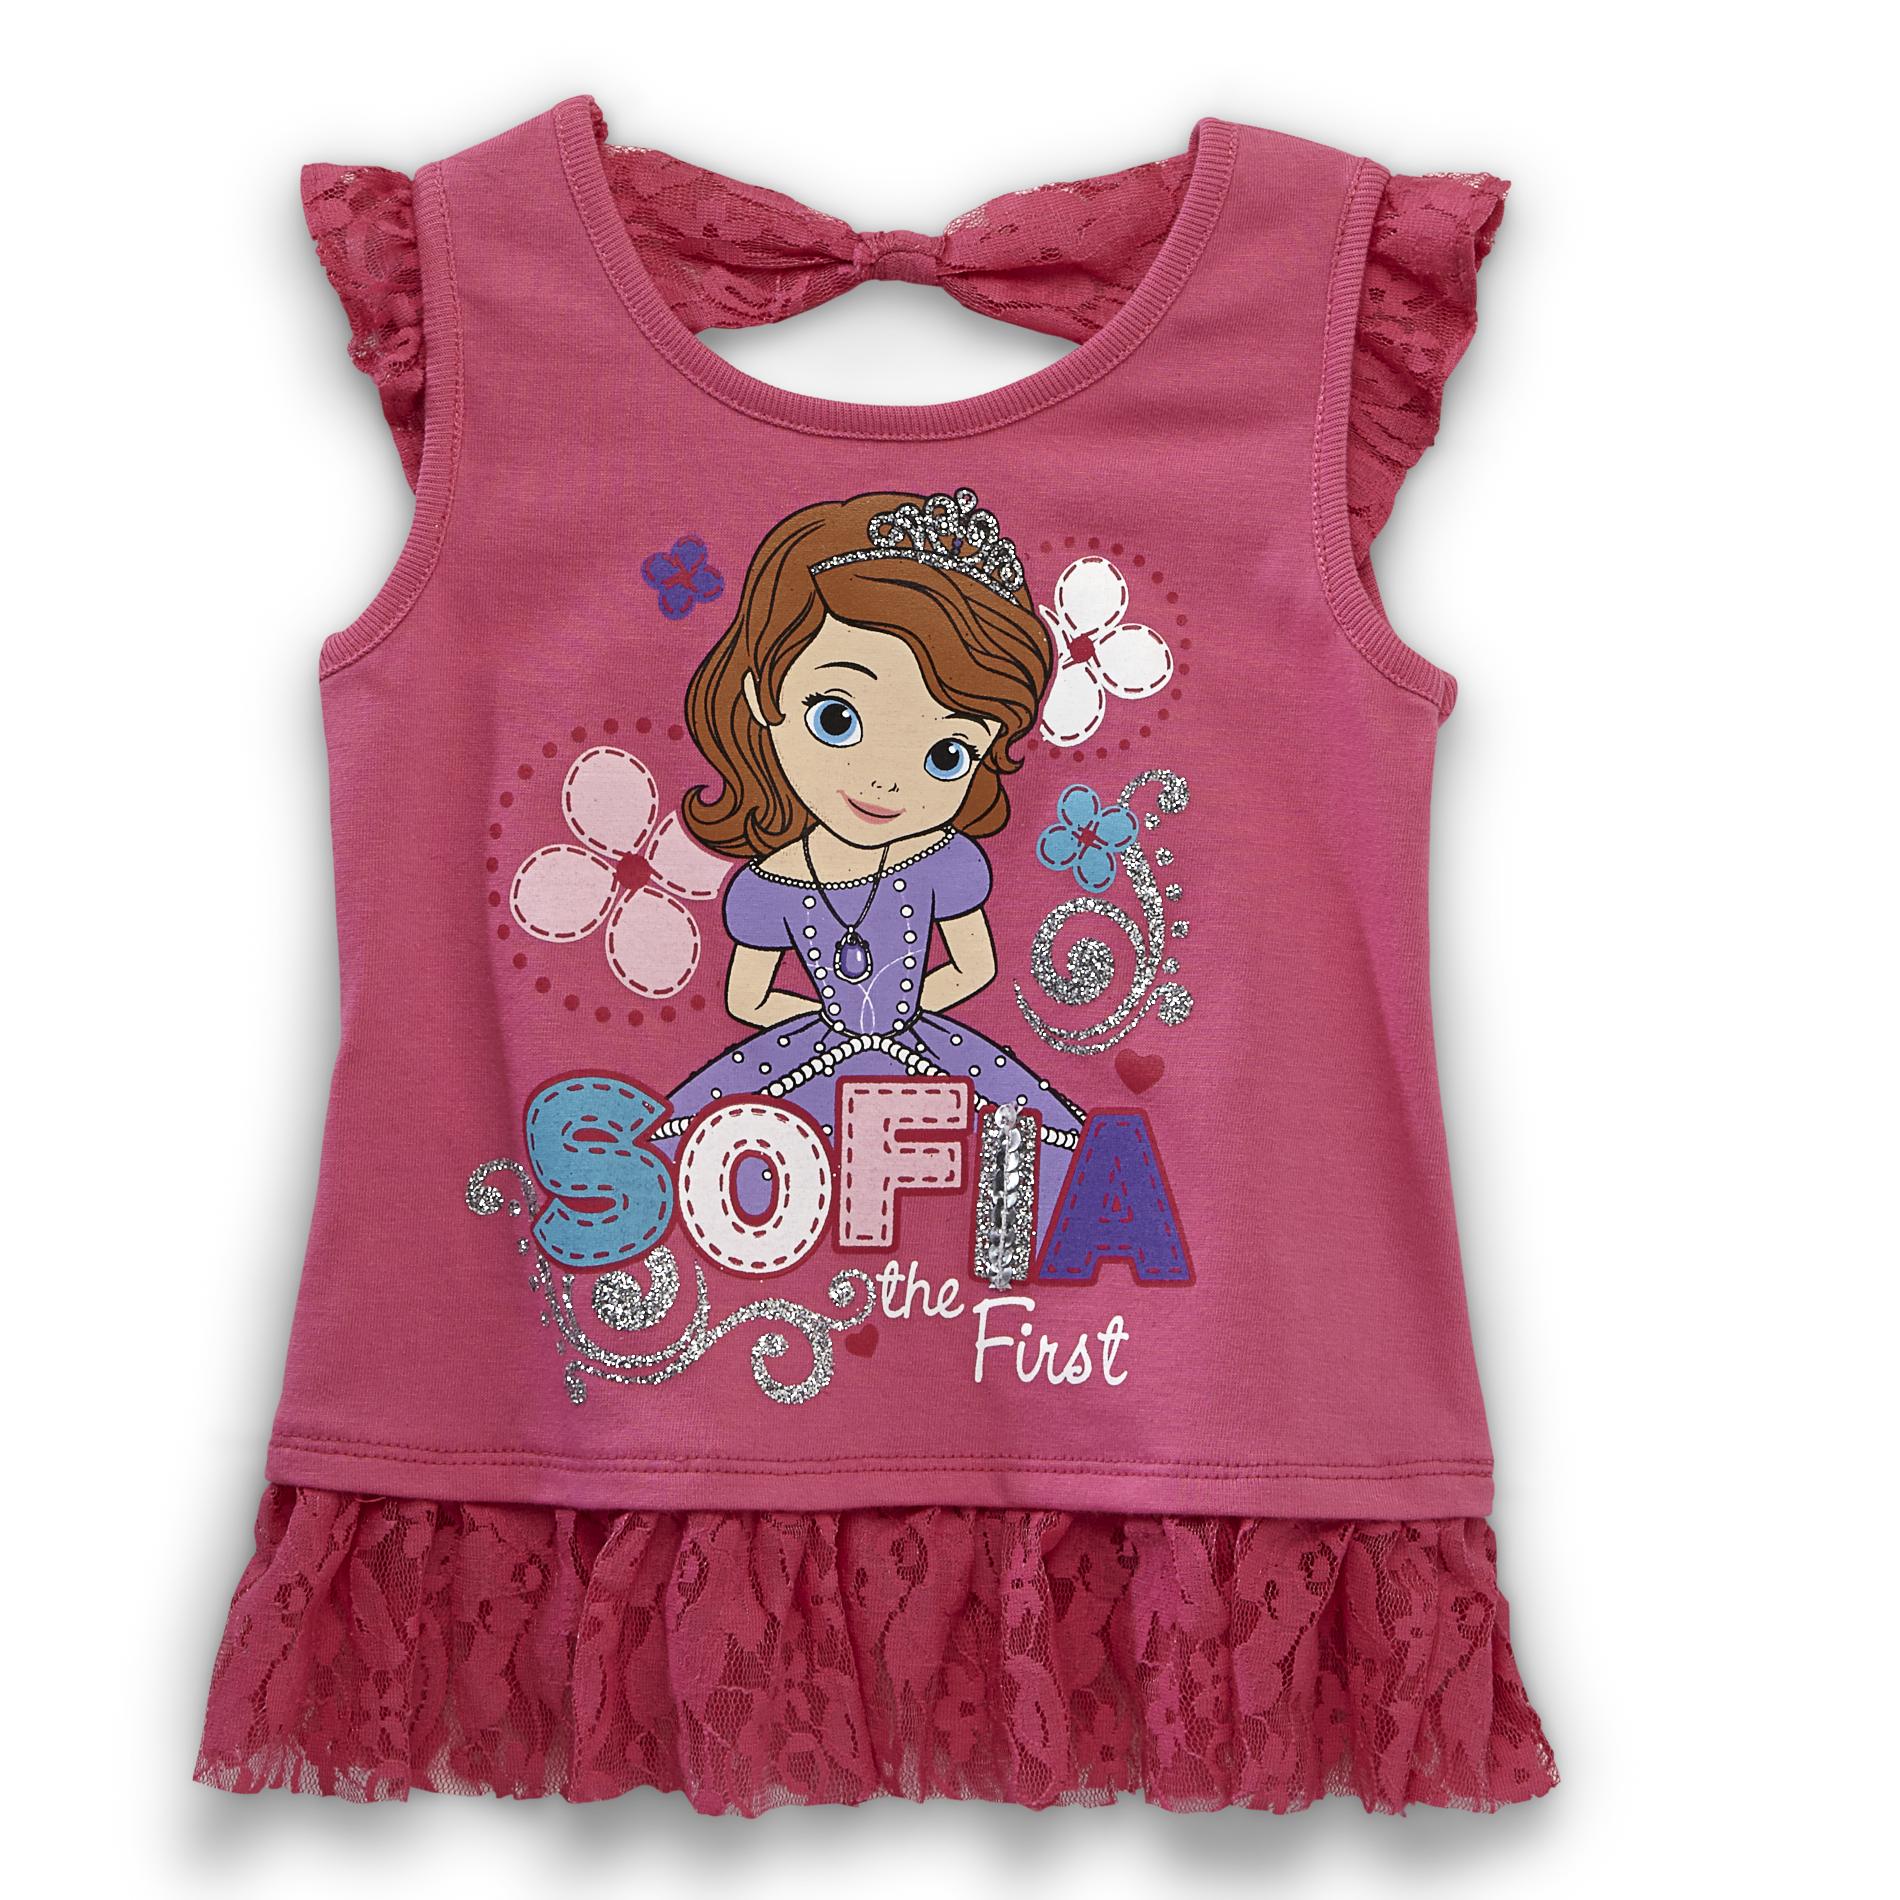 Disney Toddler Girl's Tunic Tank Top - Sofia the First